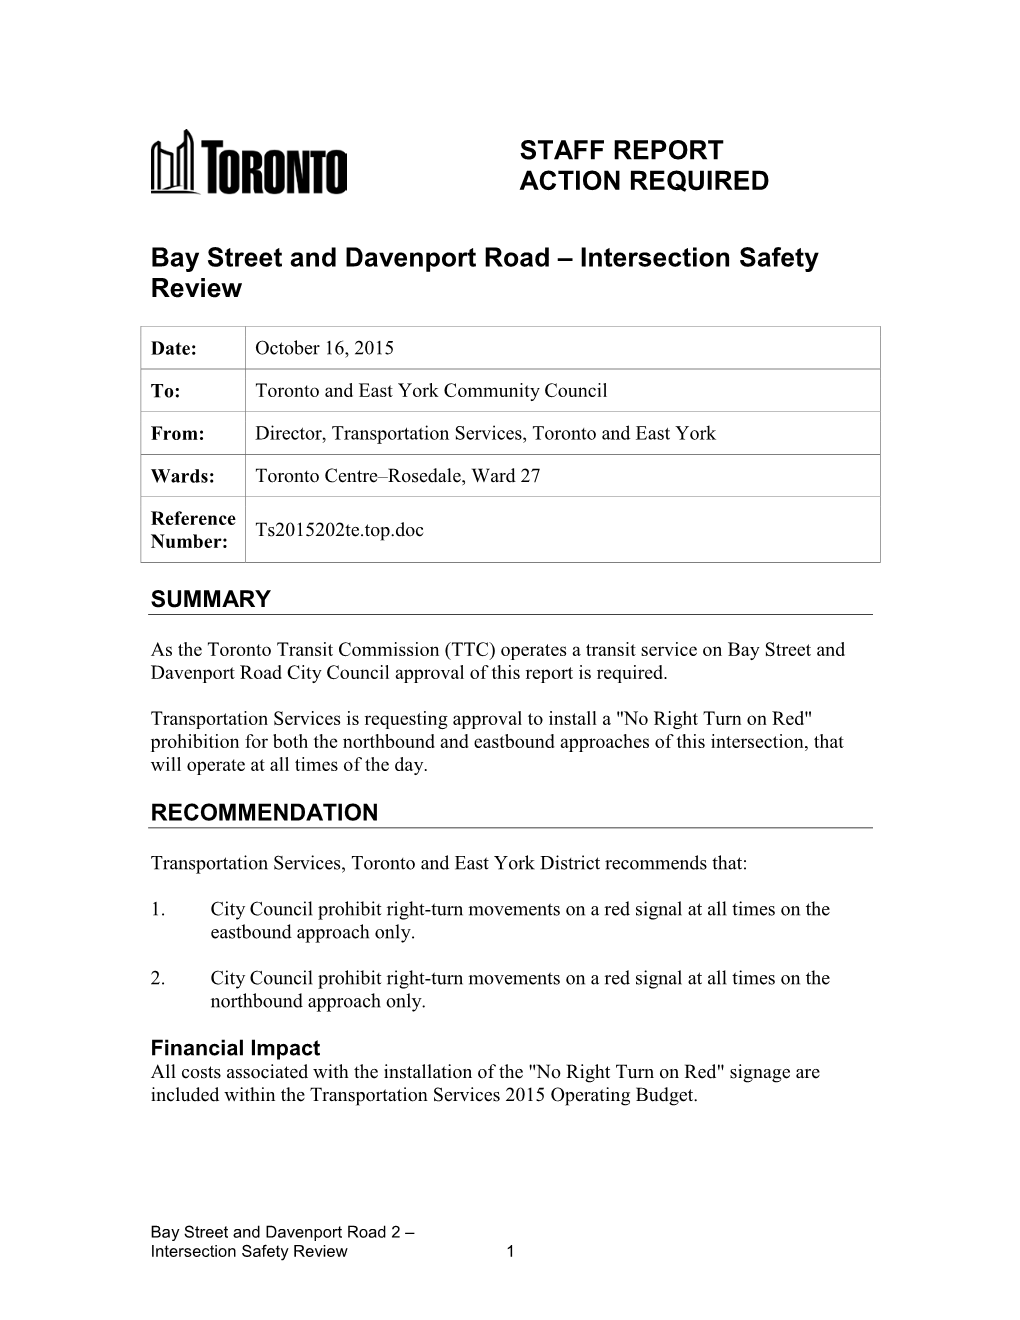 Bay Street and Davenport Road – Intersection Safety Review